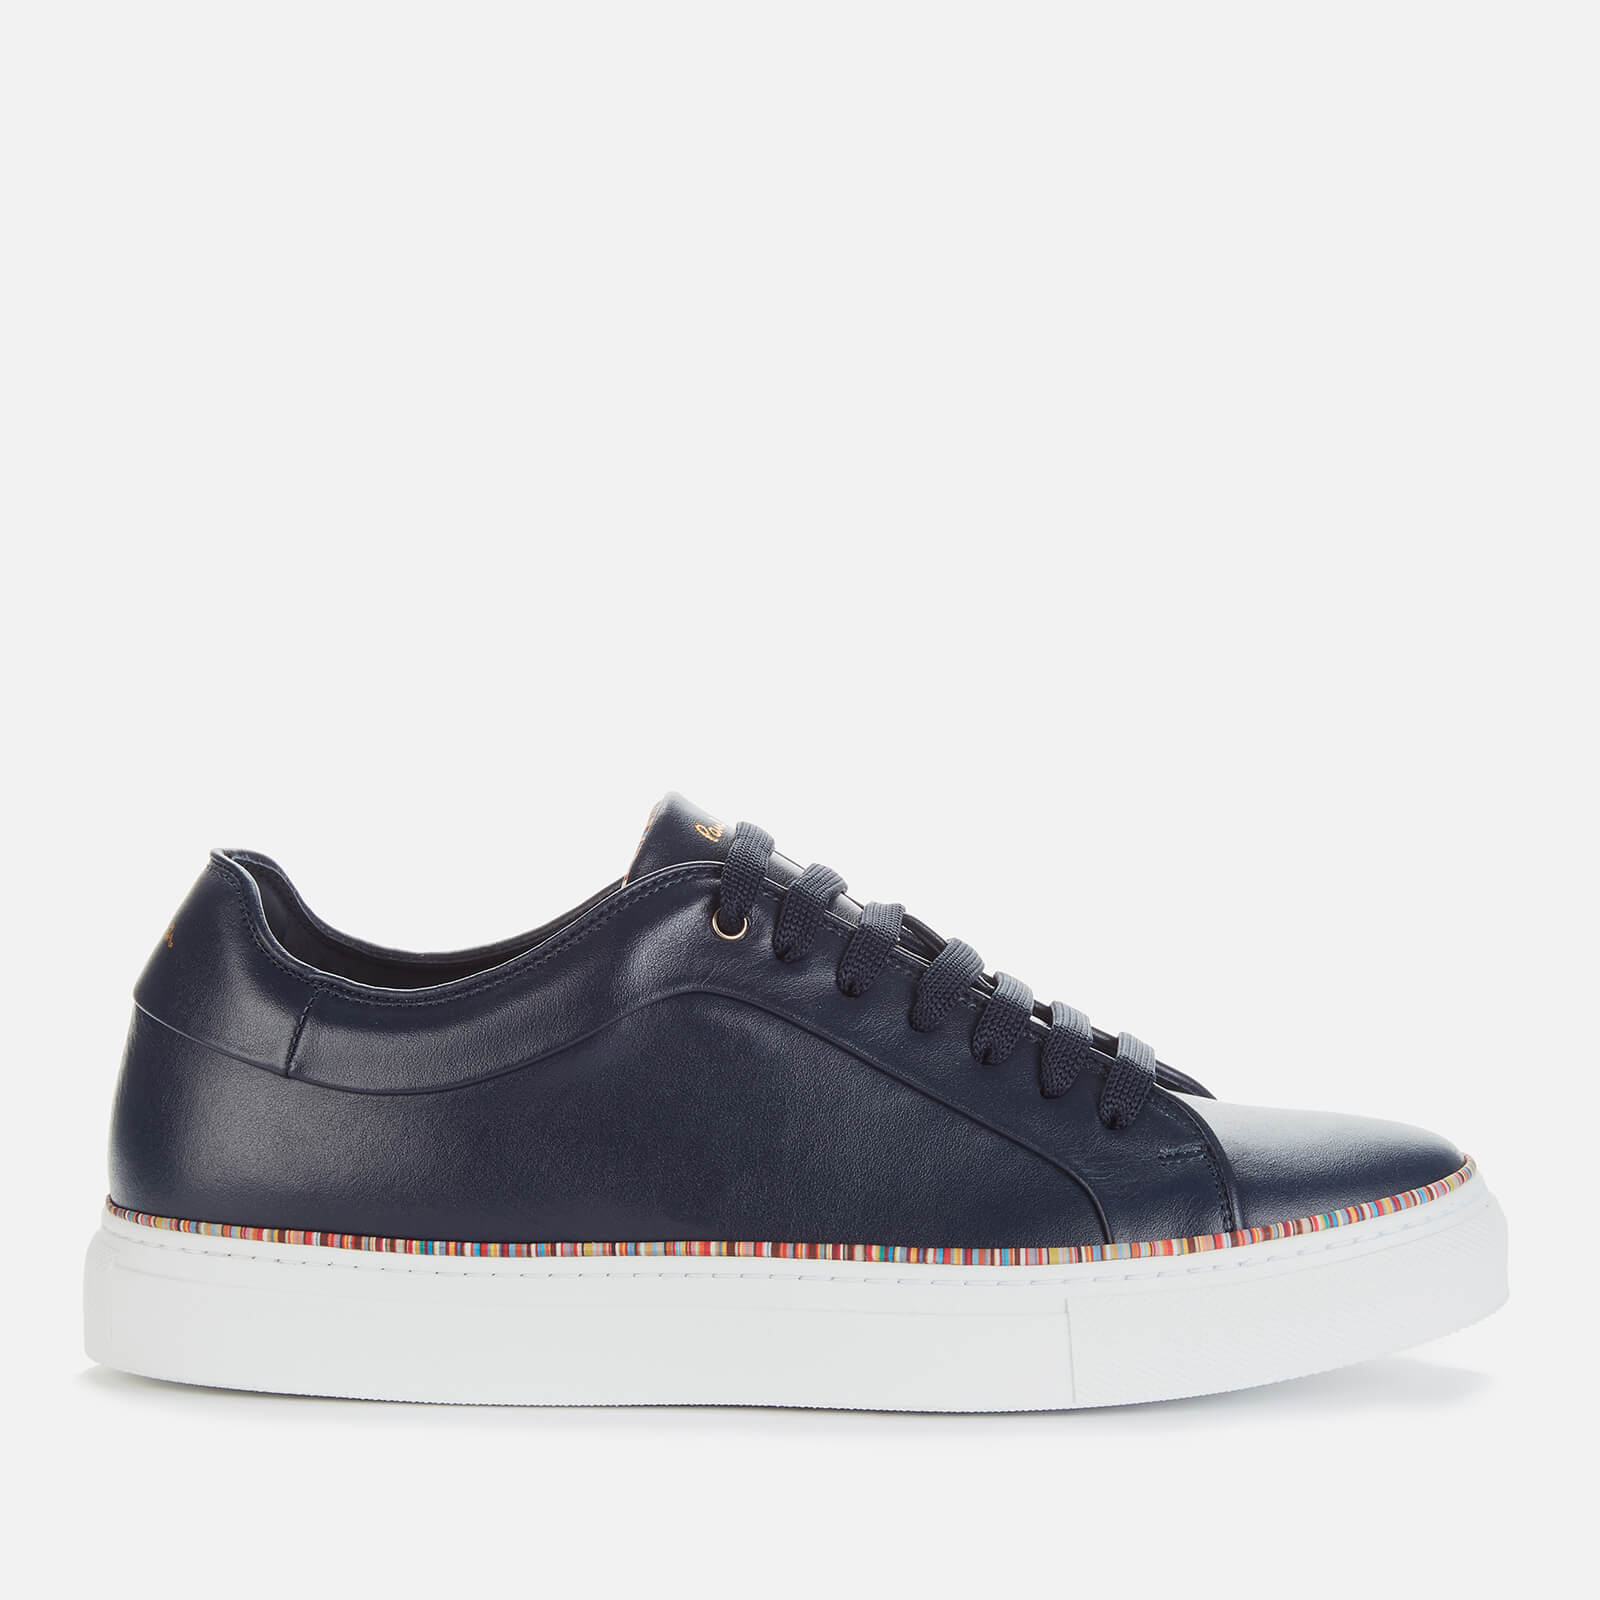 Paul Smith Men's Basso Leather Cupsole Trainers - Dark Navy/Multi Piping - UK 7